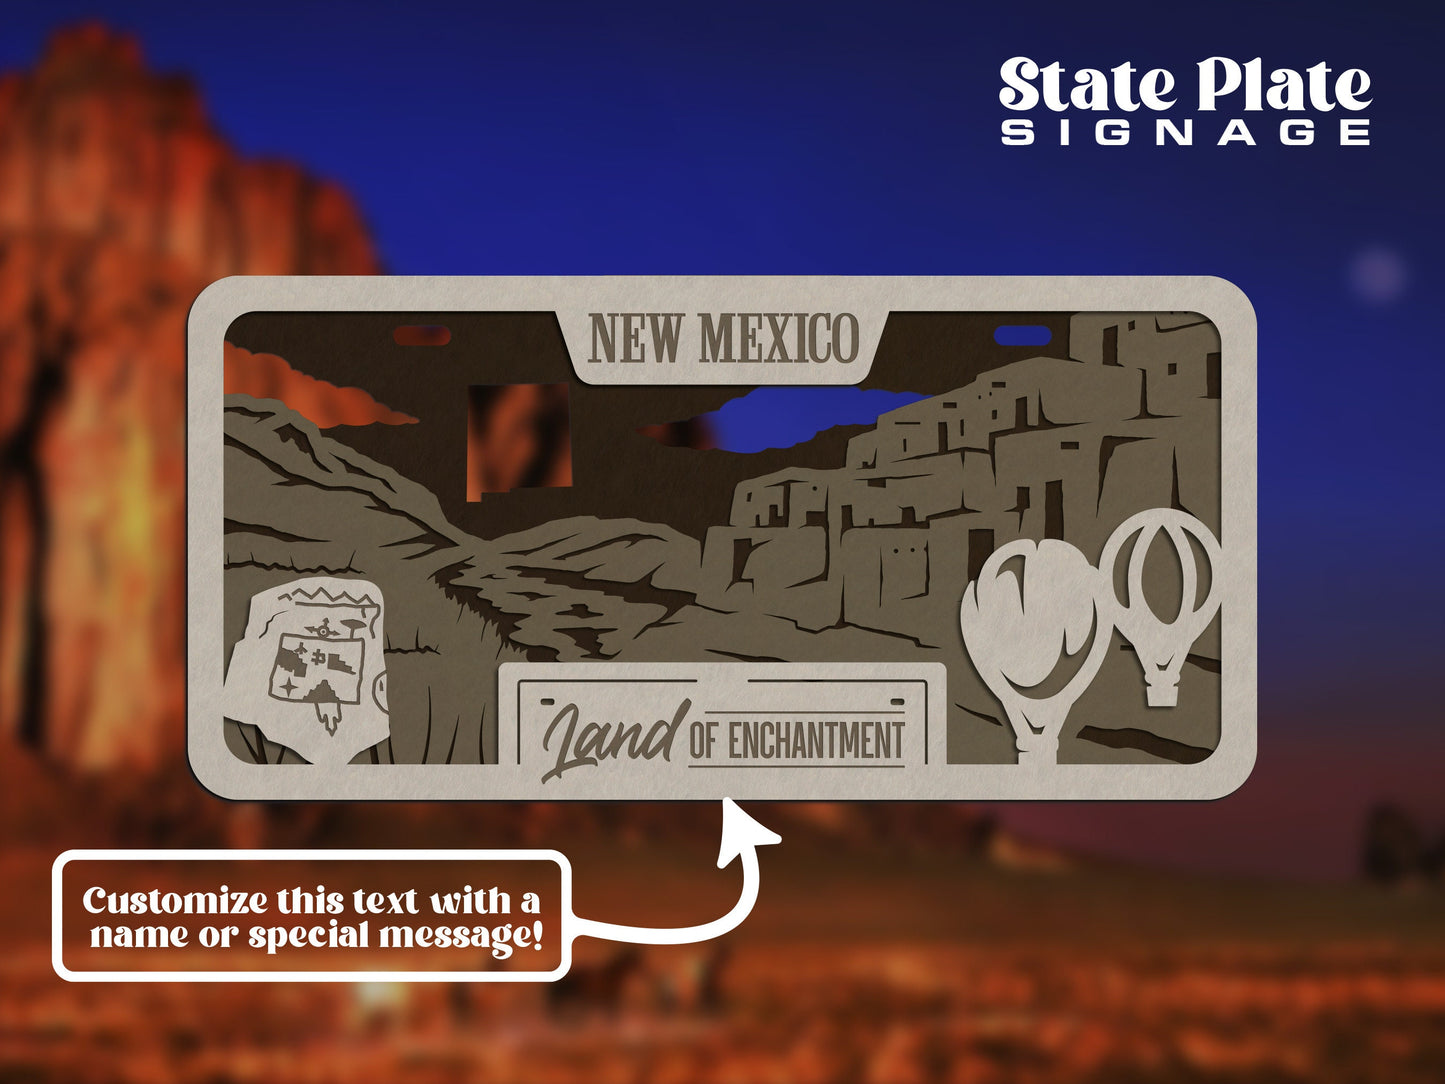 New Mexico State Plate Ornament and Signage - SVG File Download - Sized for Glowforge - Laser Ready Digital Files